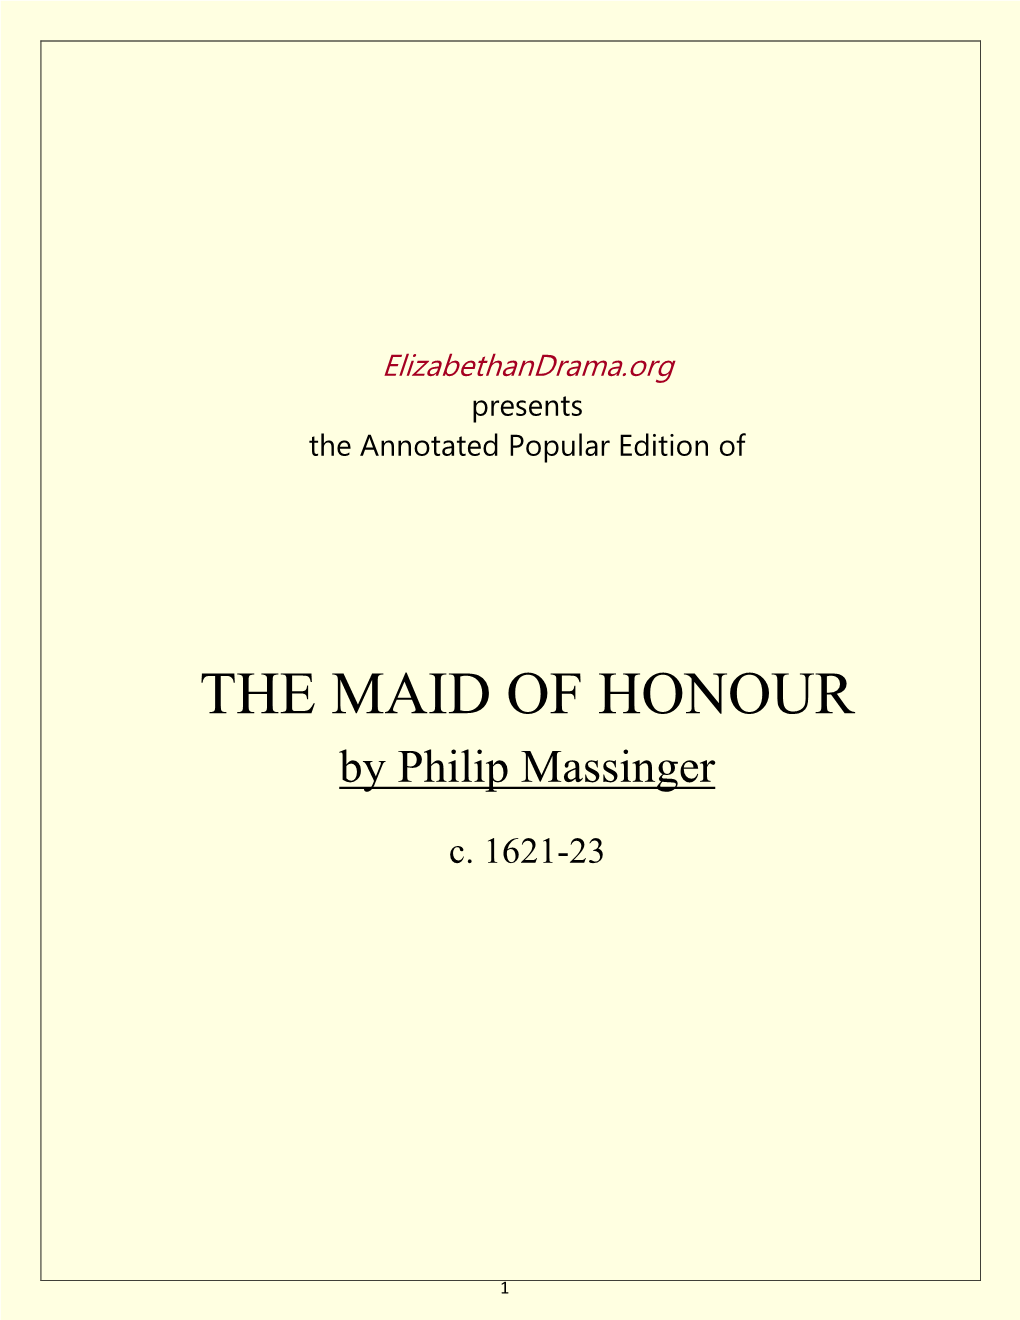 THE MAID of HONOUR by Philip Massinger